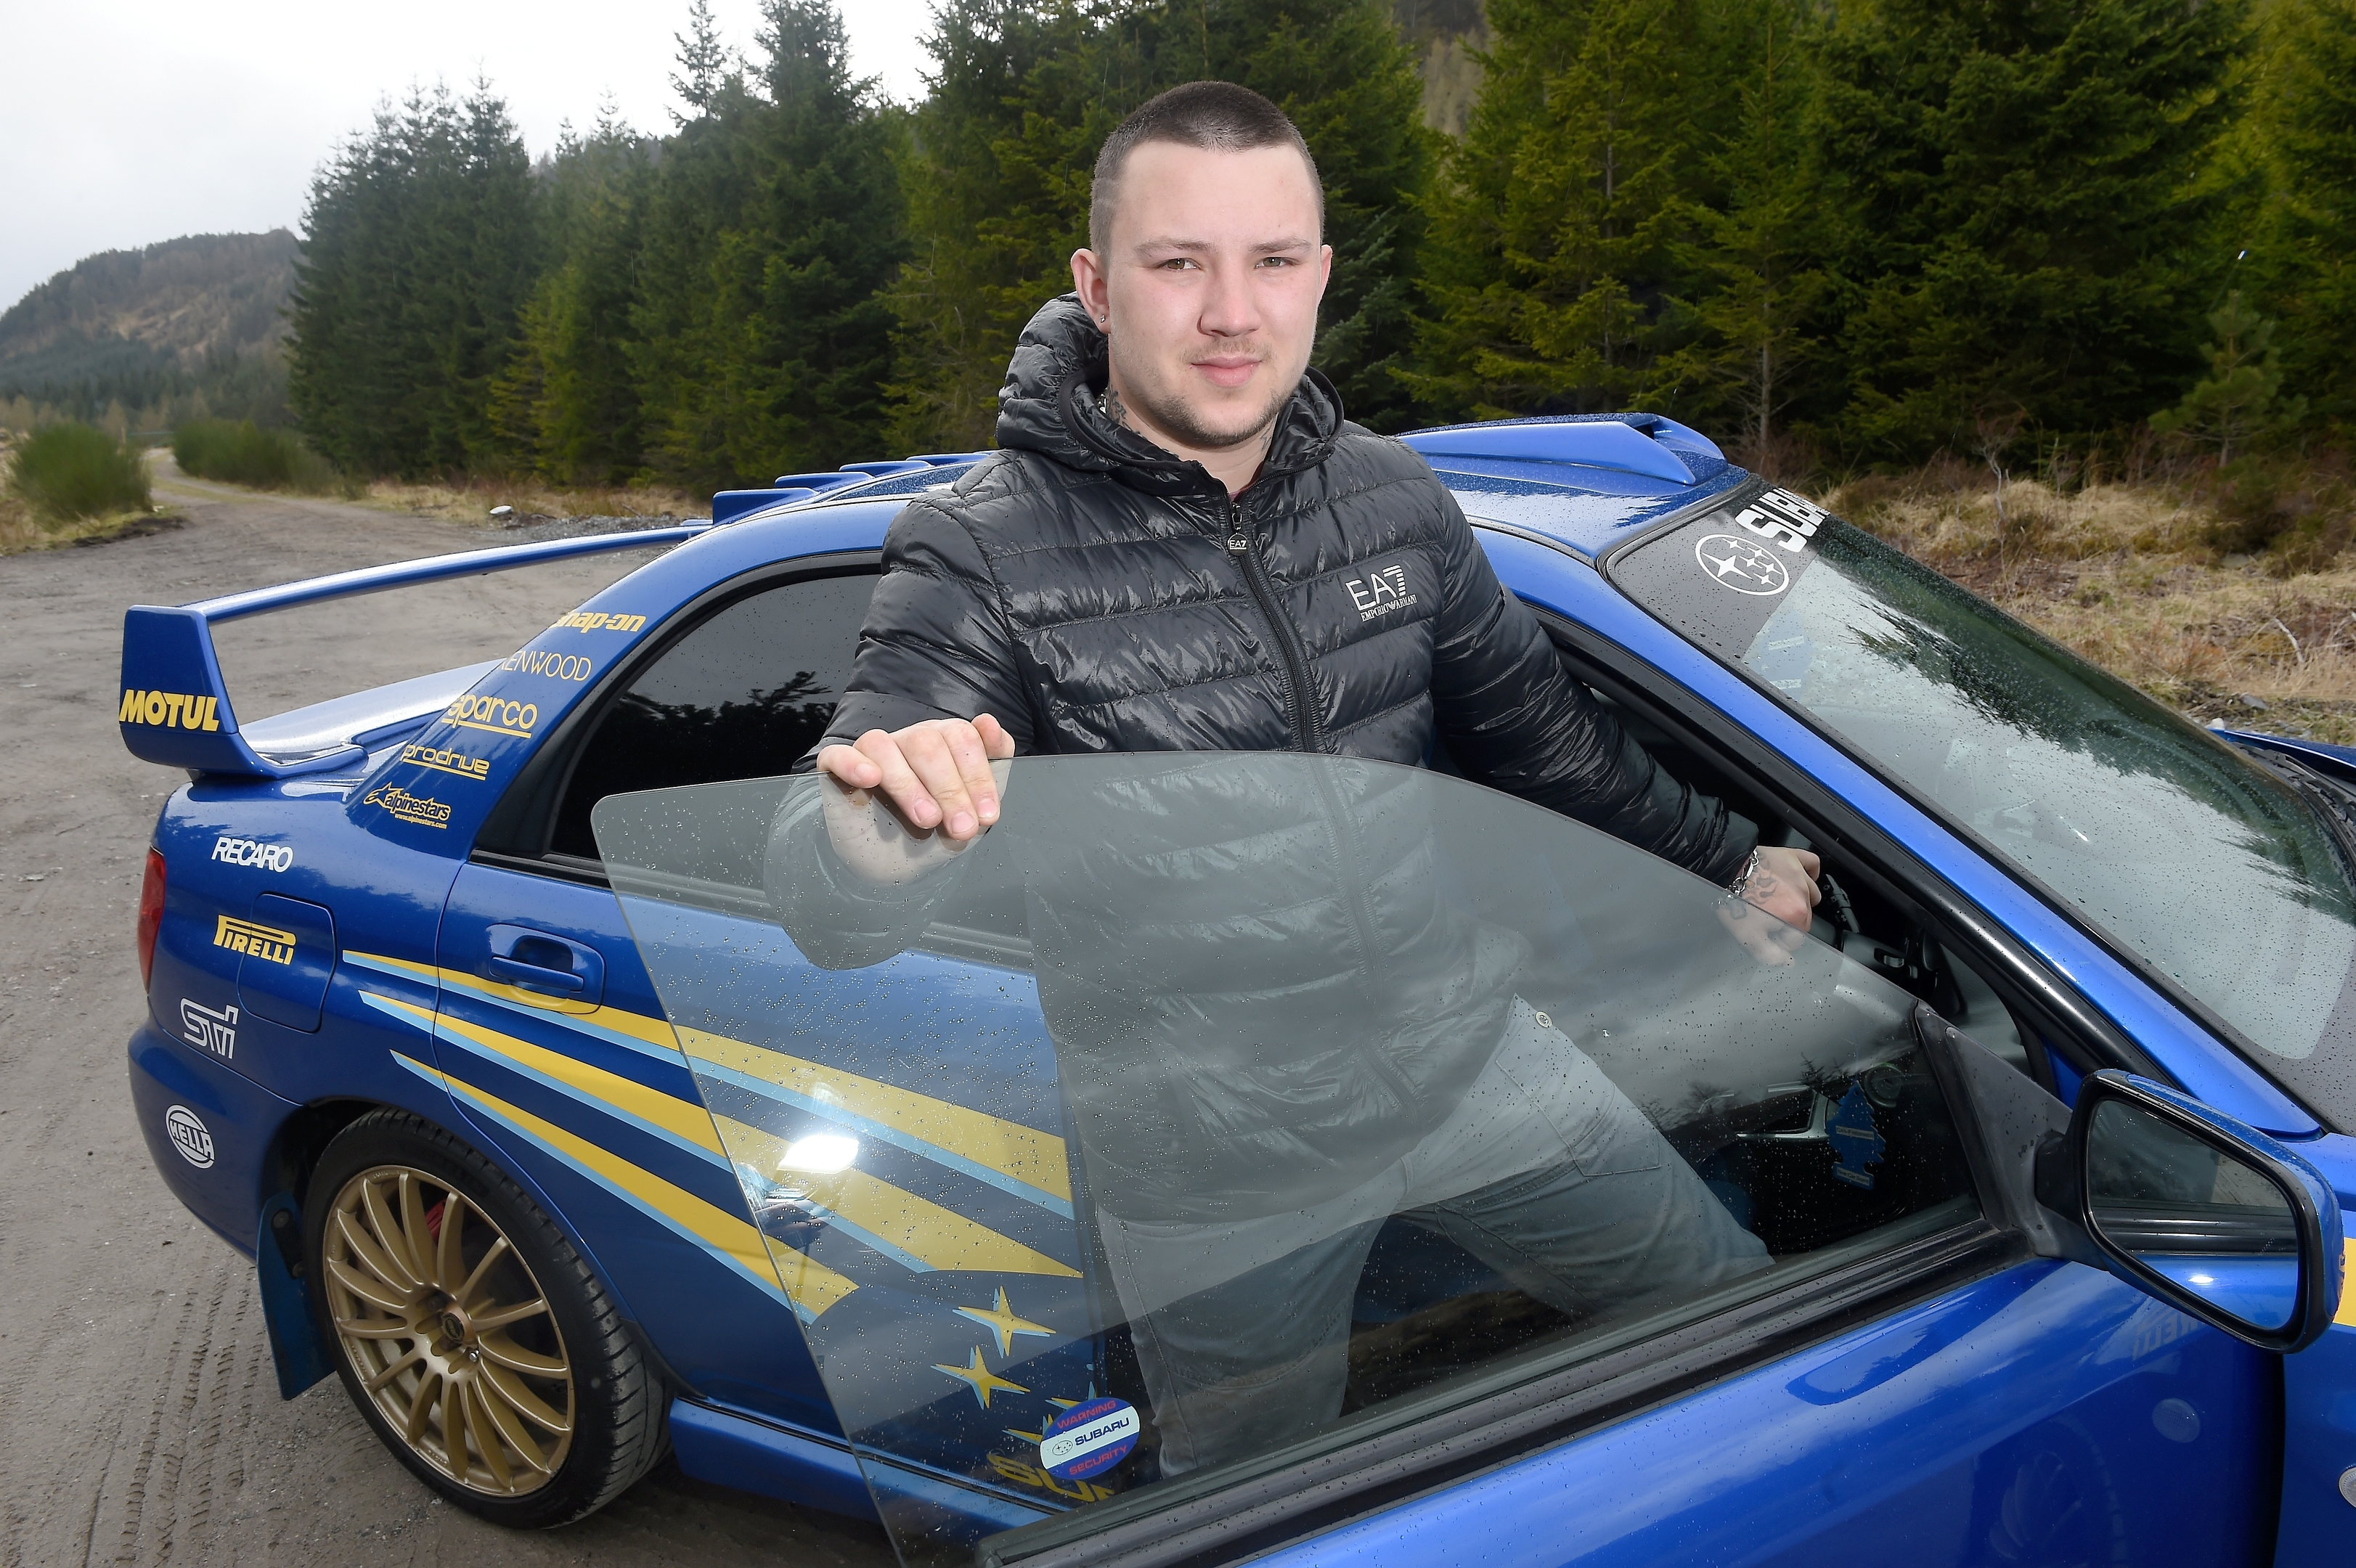 Dylan Ritchie of Laggan, Badenoch with his Subaru Impreza which along with others will be leading the funeral procession for Kieran McQuillan.